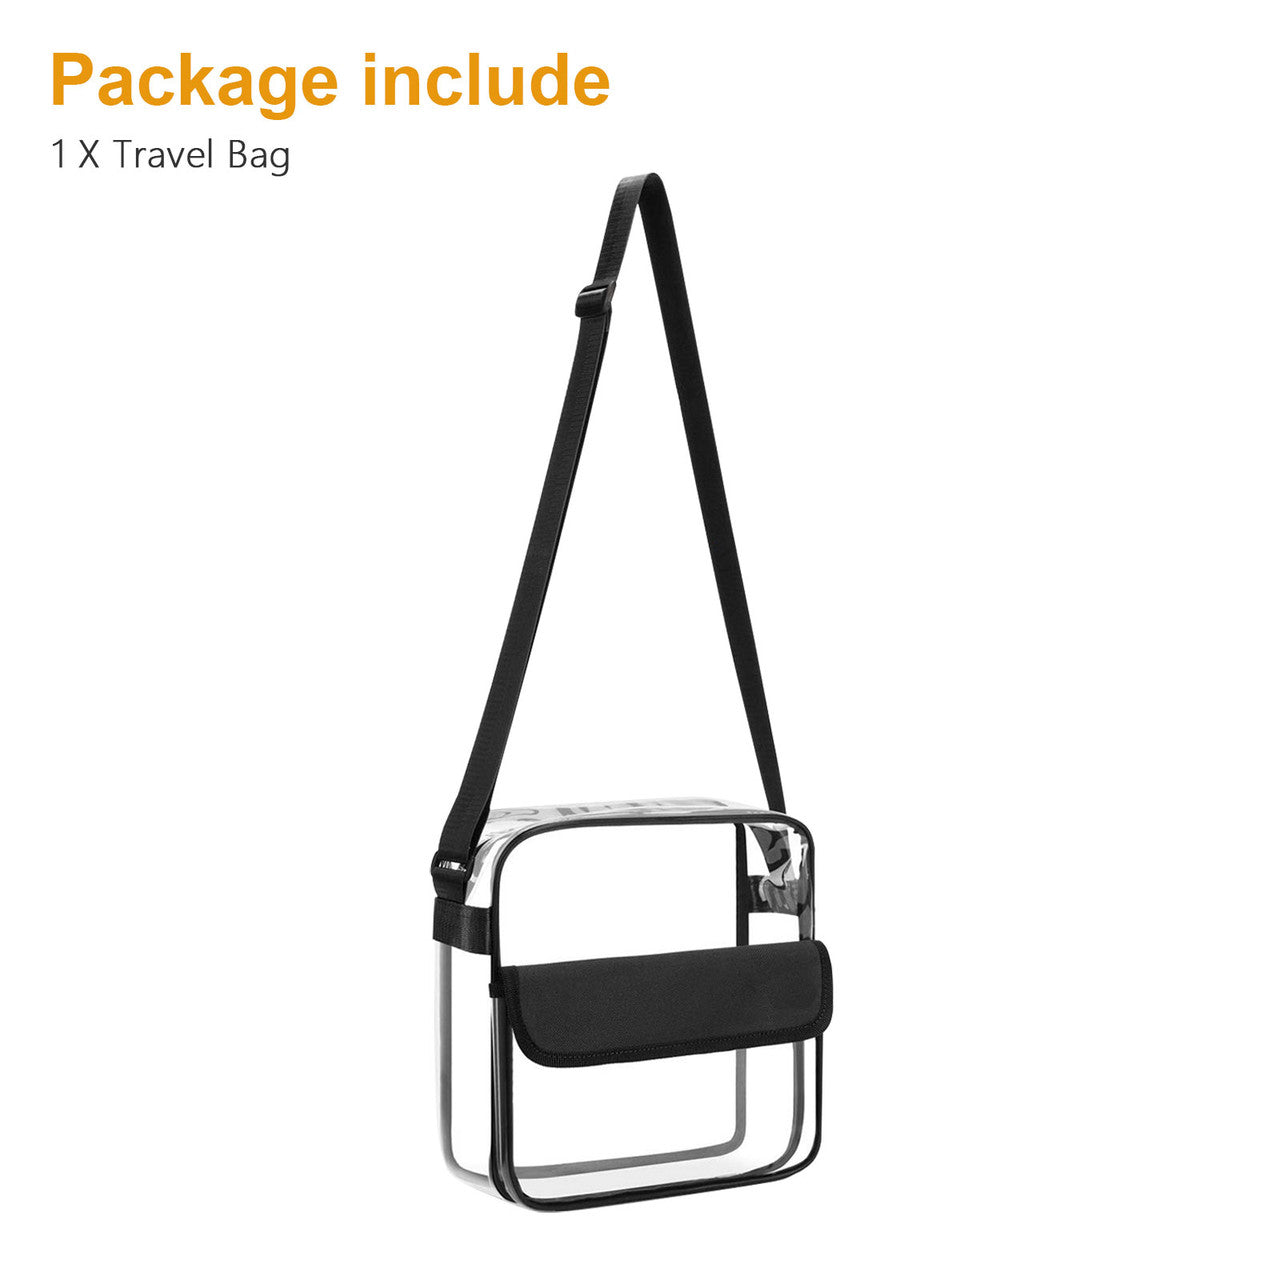 Clear Cross-Body Messenger Shoulder Bag, Clear Tote Bag Clear Purse with Adjustable Strap, Transparent Bag Crossbody for Women,Clear Handbag See Through Tote Bag, Black